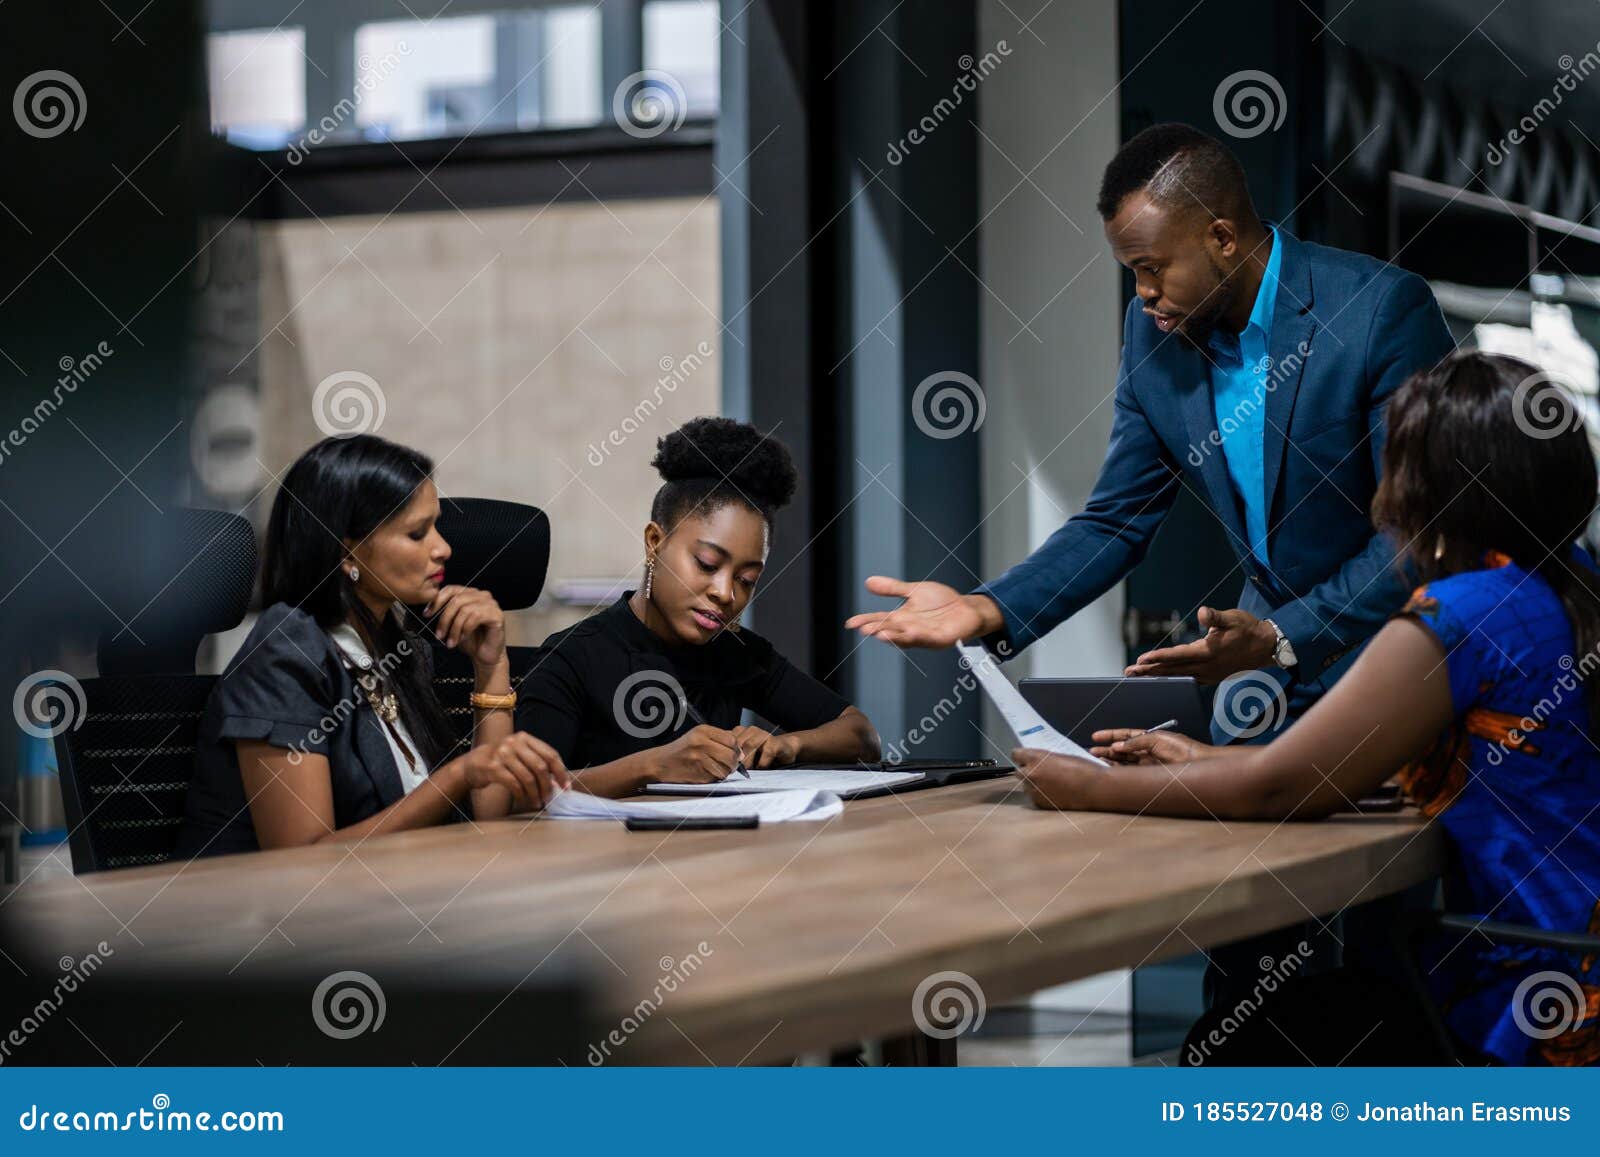 african businessman talking with a diverse group of female colleagues while having a meeting together around a table in an office